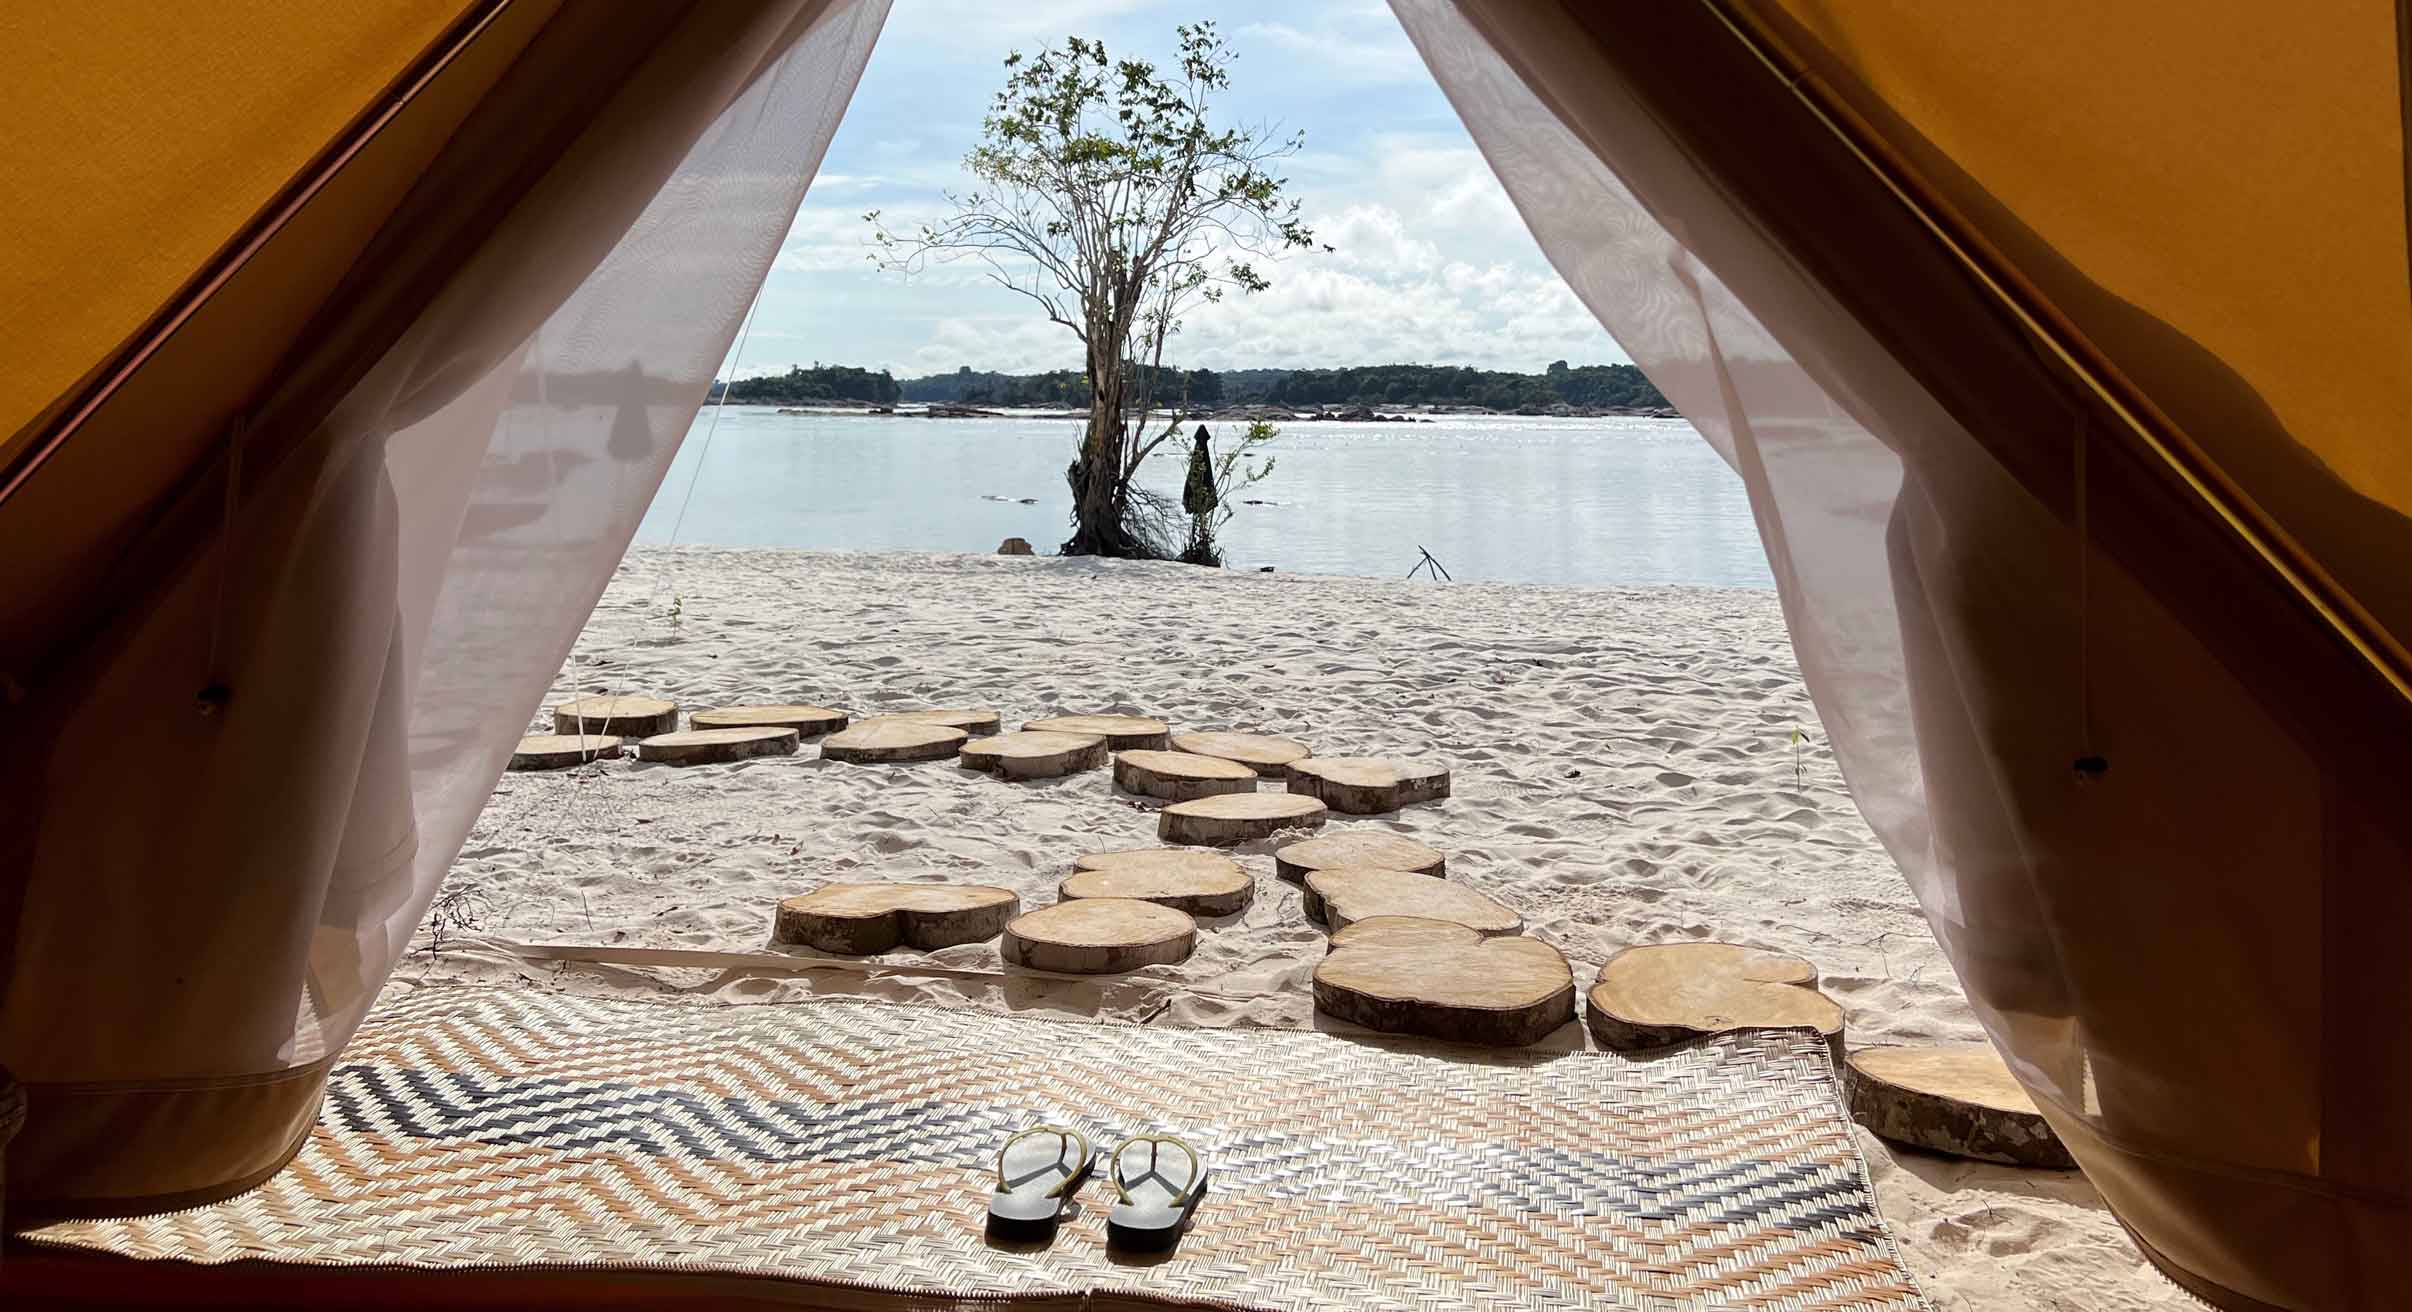 Views from mobile tent in Brazilian Amazon